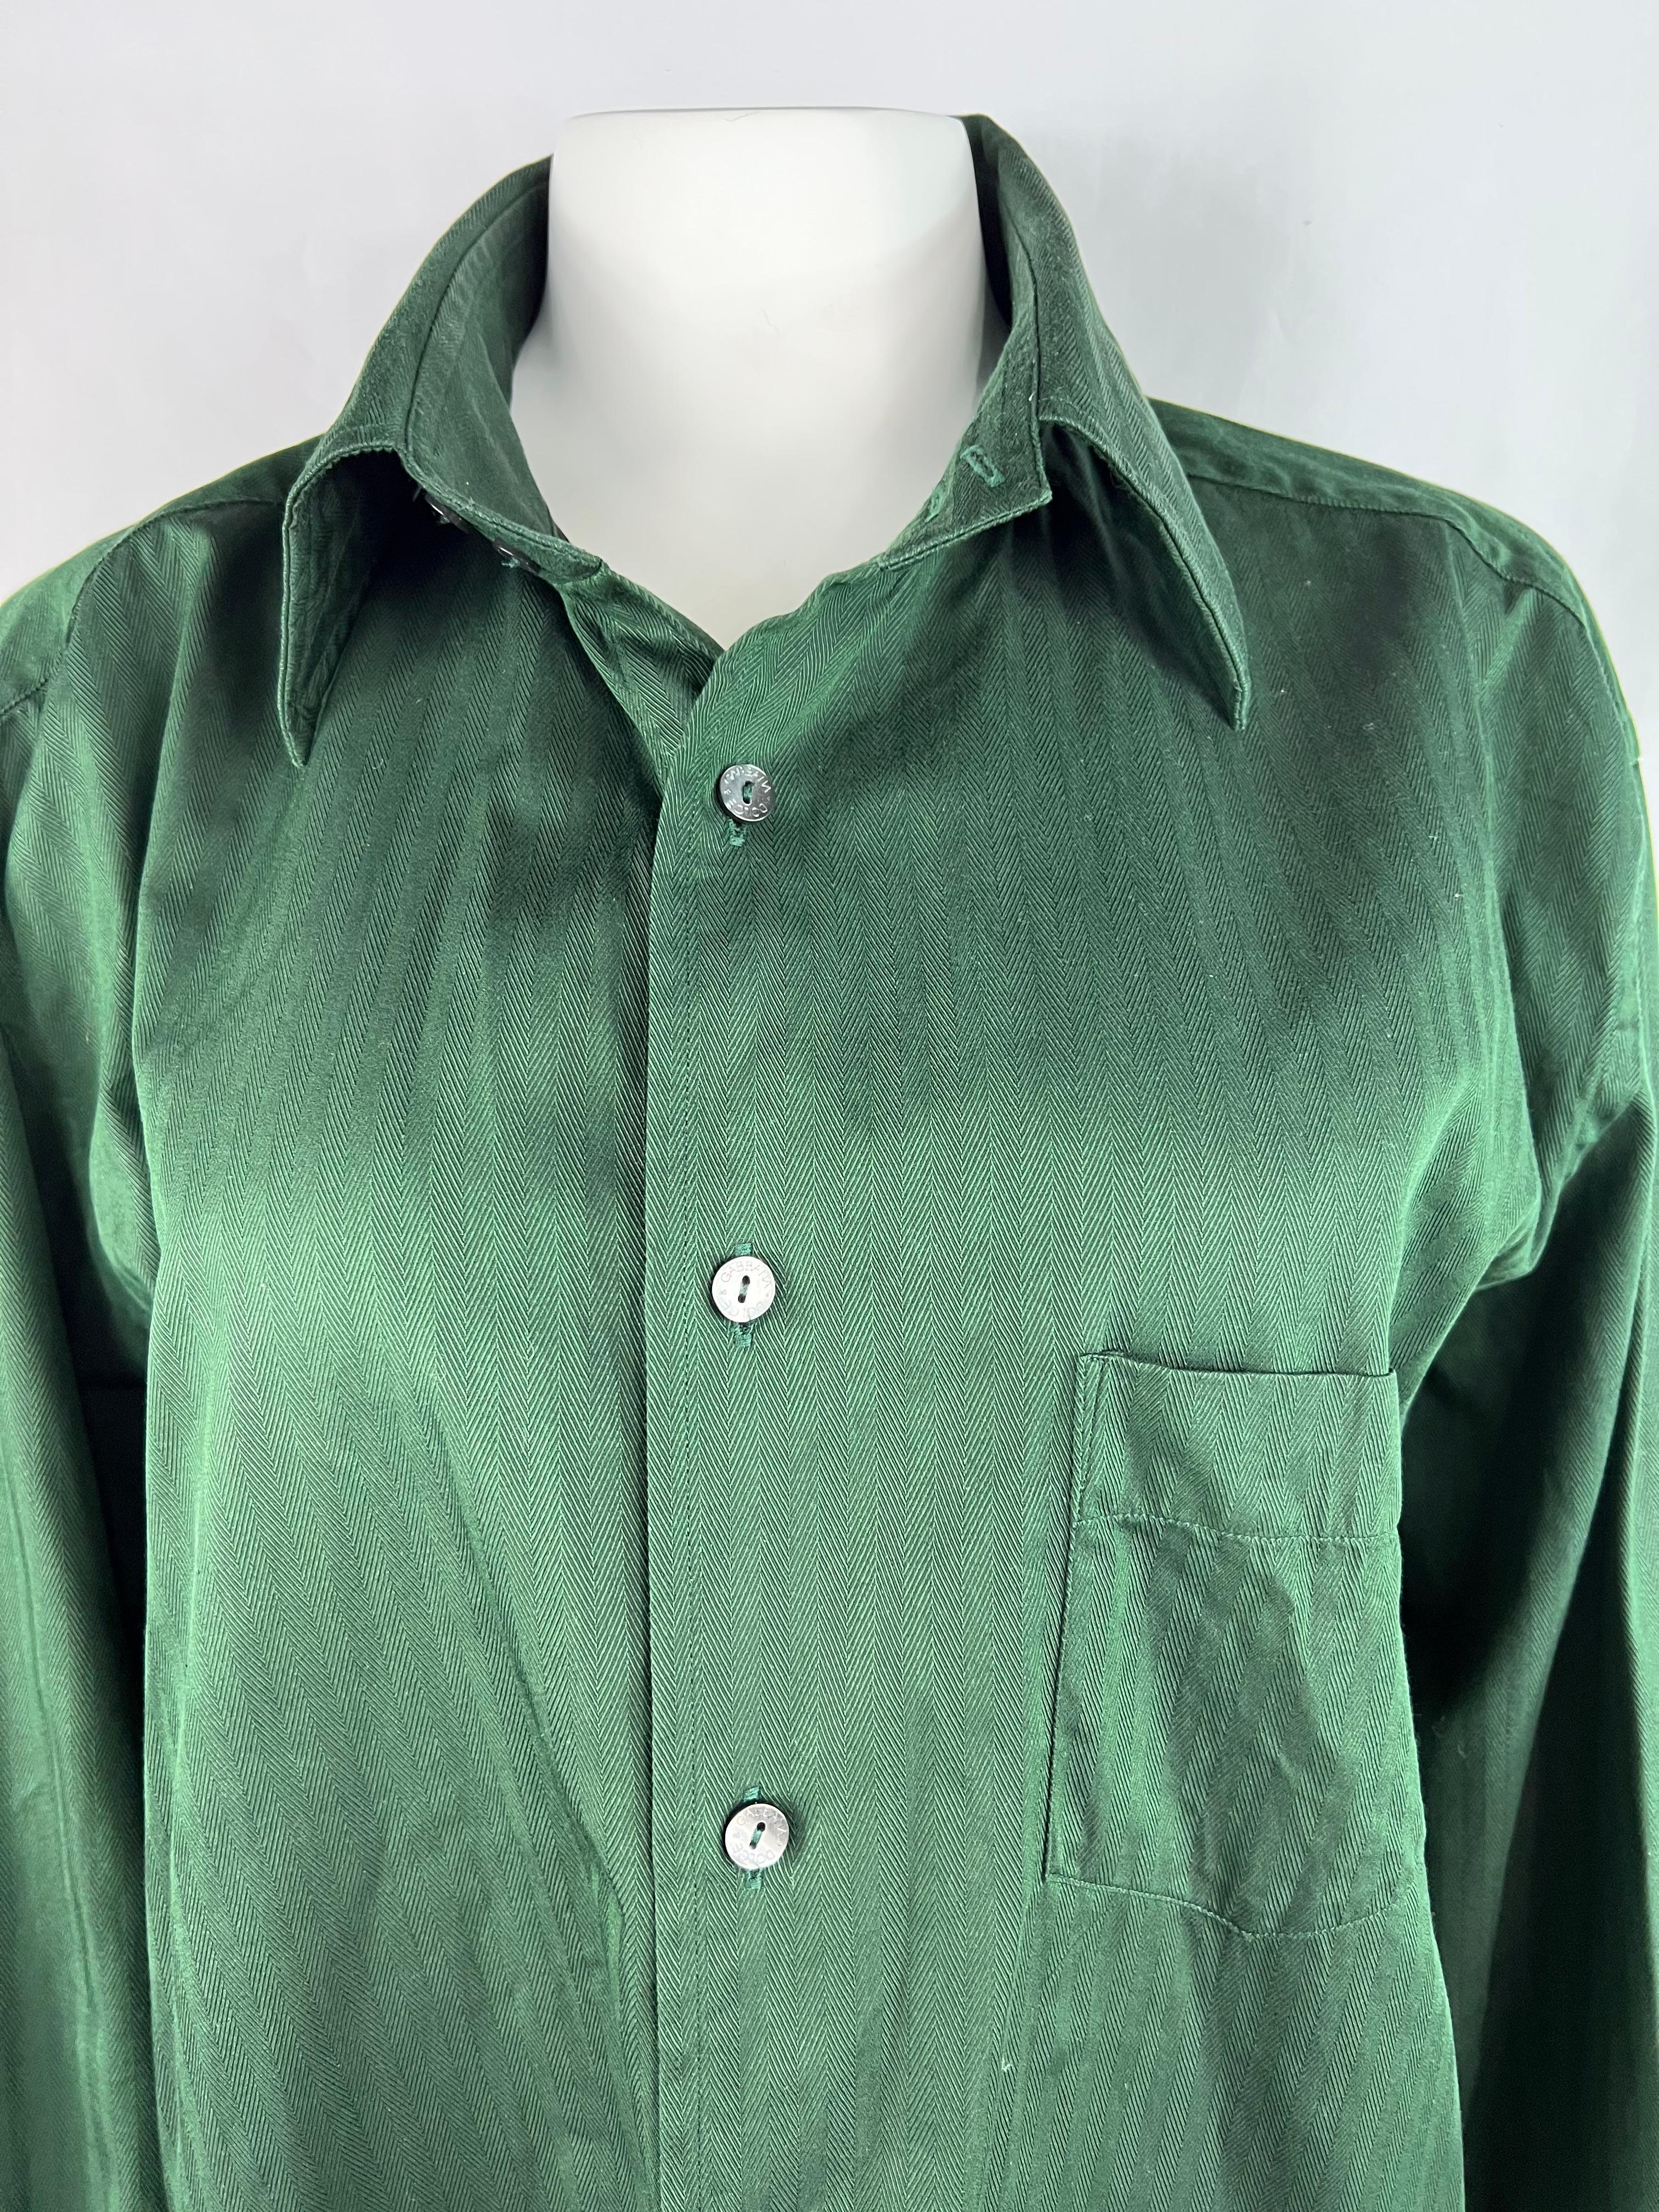 Product details:

The shirt features zig zag pattern and side pocket detail. Made in Italy.